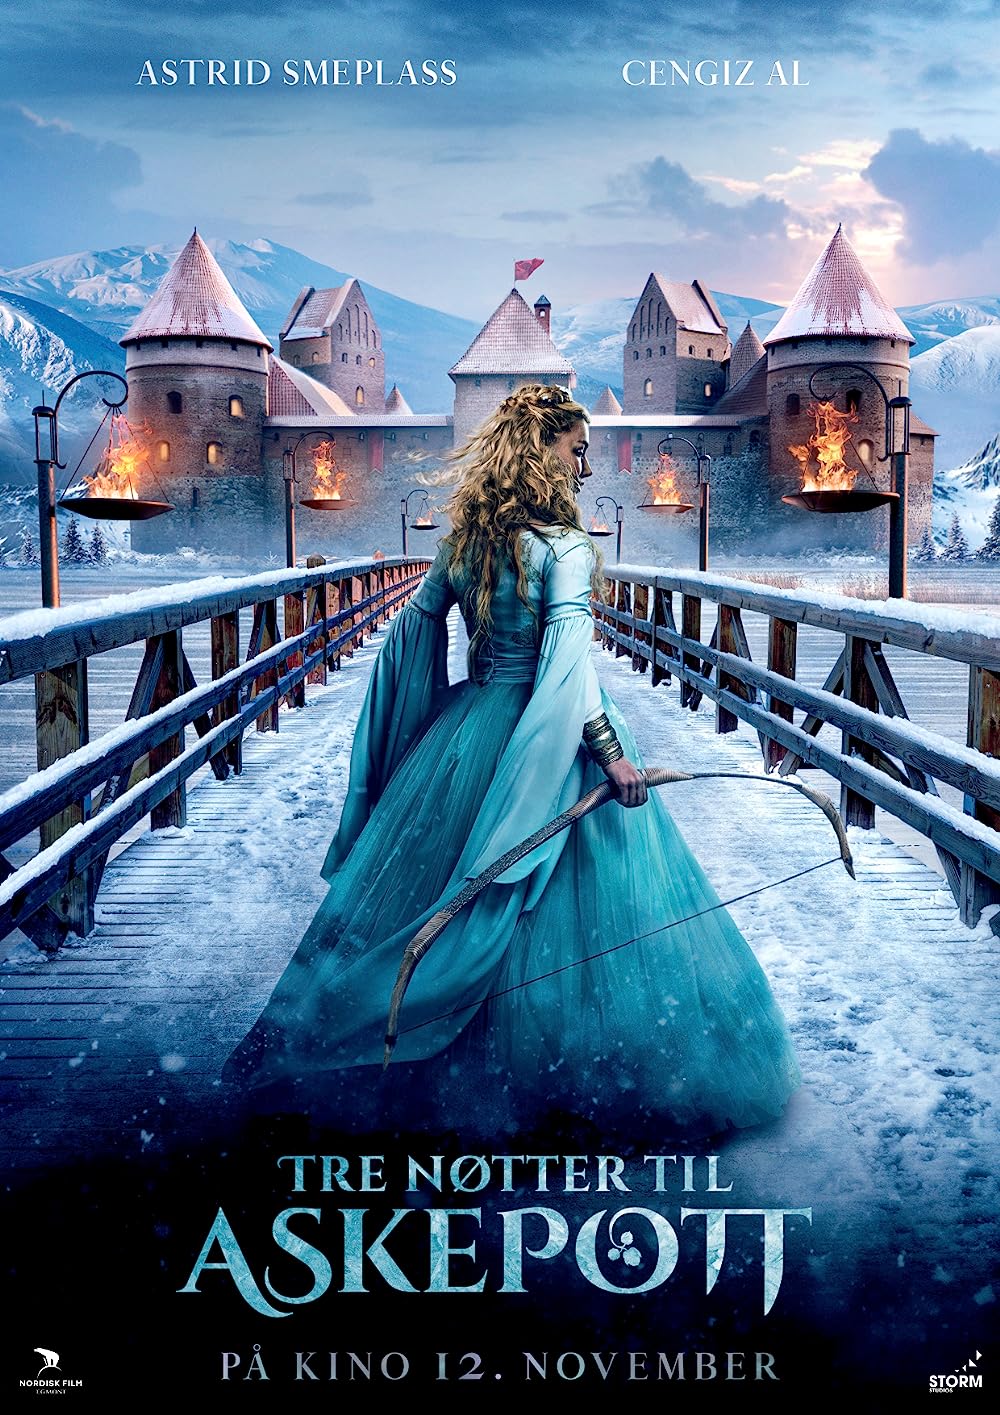 Three Wishes for Cinderella poster